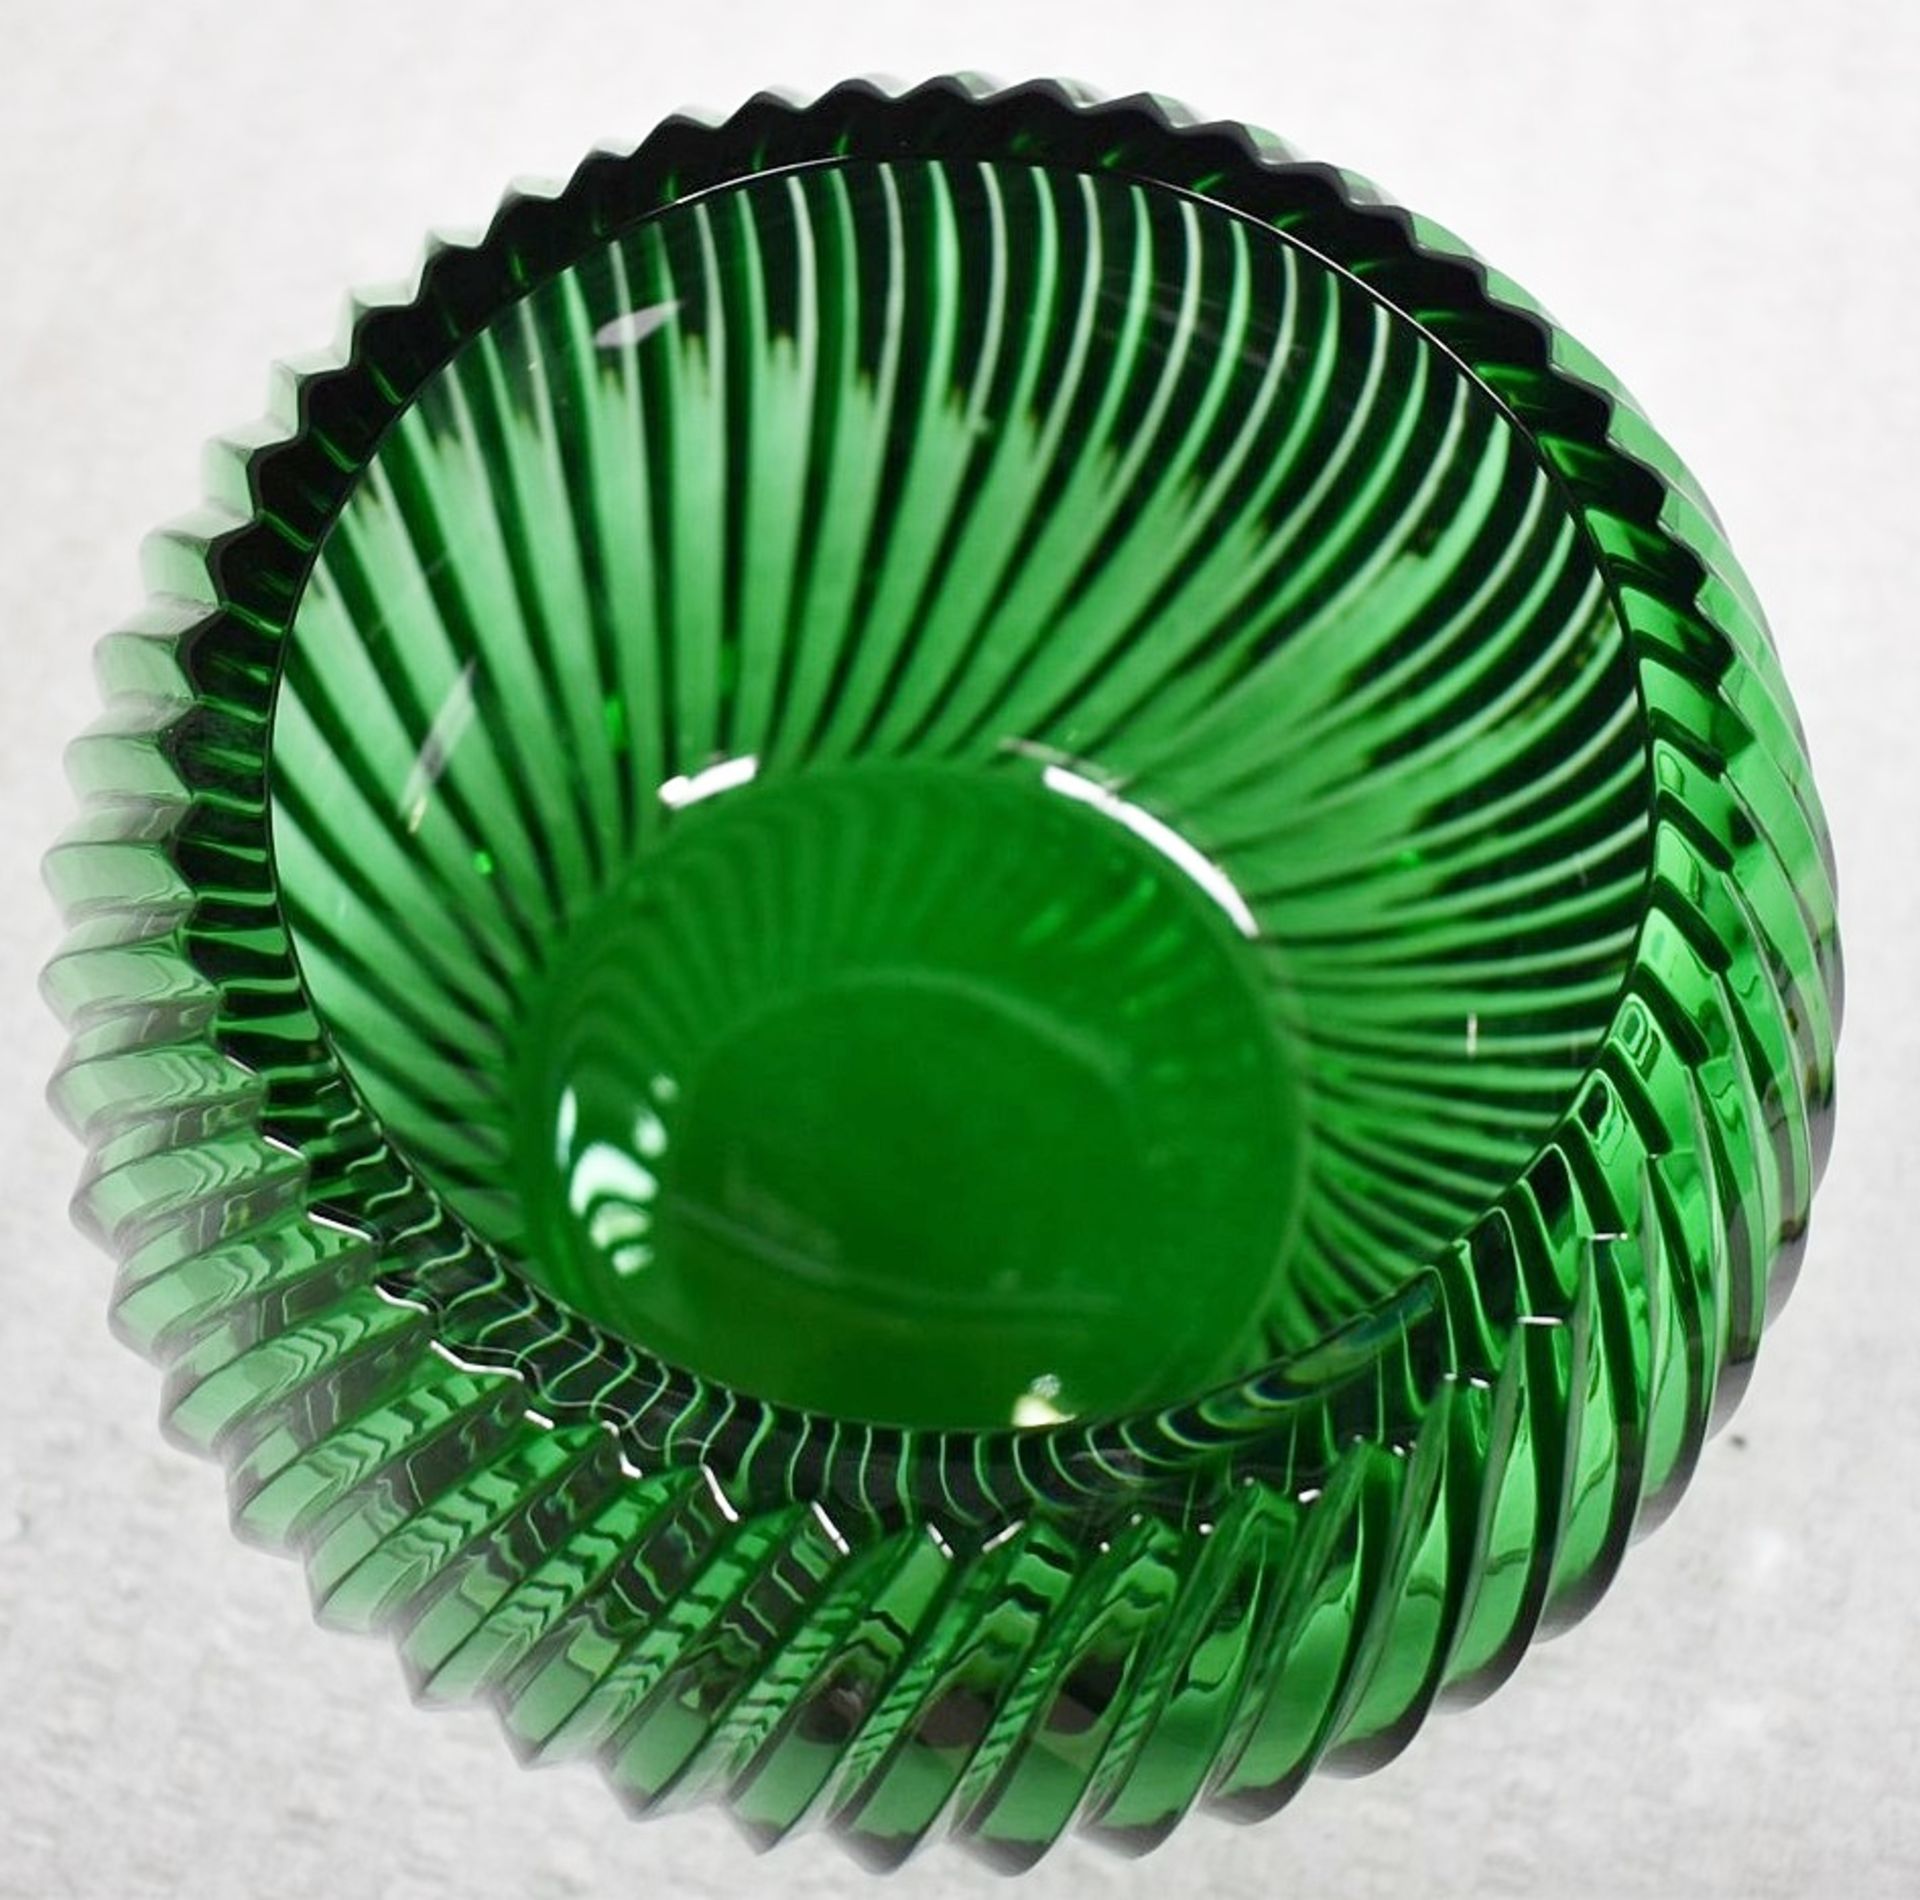 1 x BALDI 'Home Jewels' Italian Hand-crafted Artisan Crystal Bowl In Green - Dimensions: Height 15cm - Image 2 of 4